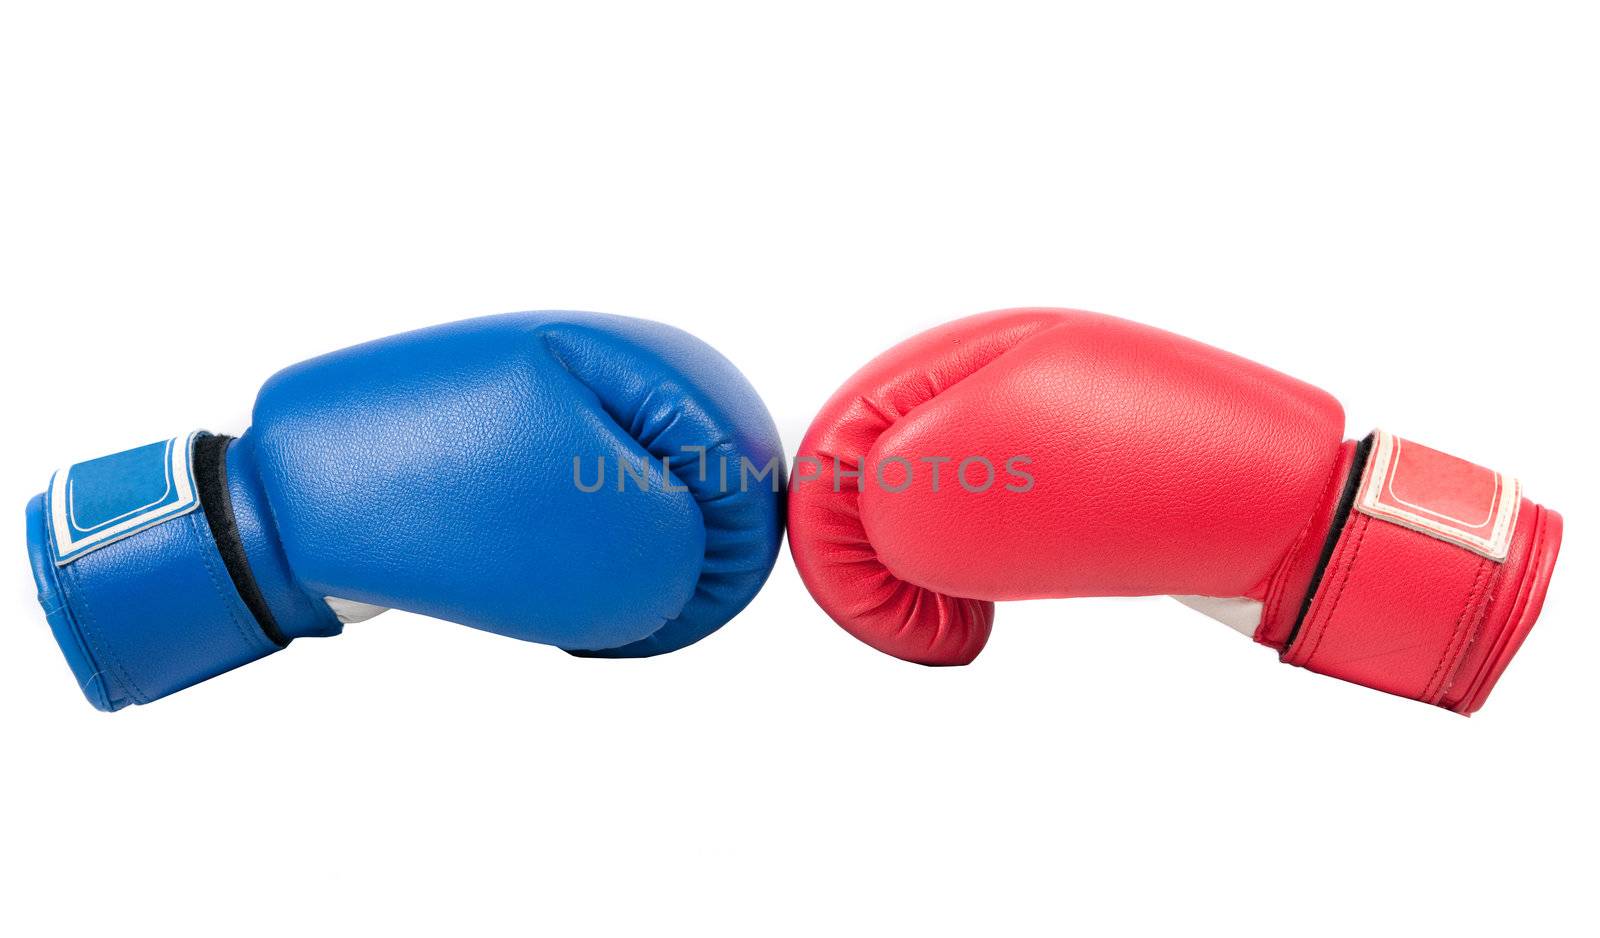 Boxing gloves on a white background close up